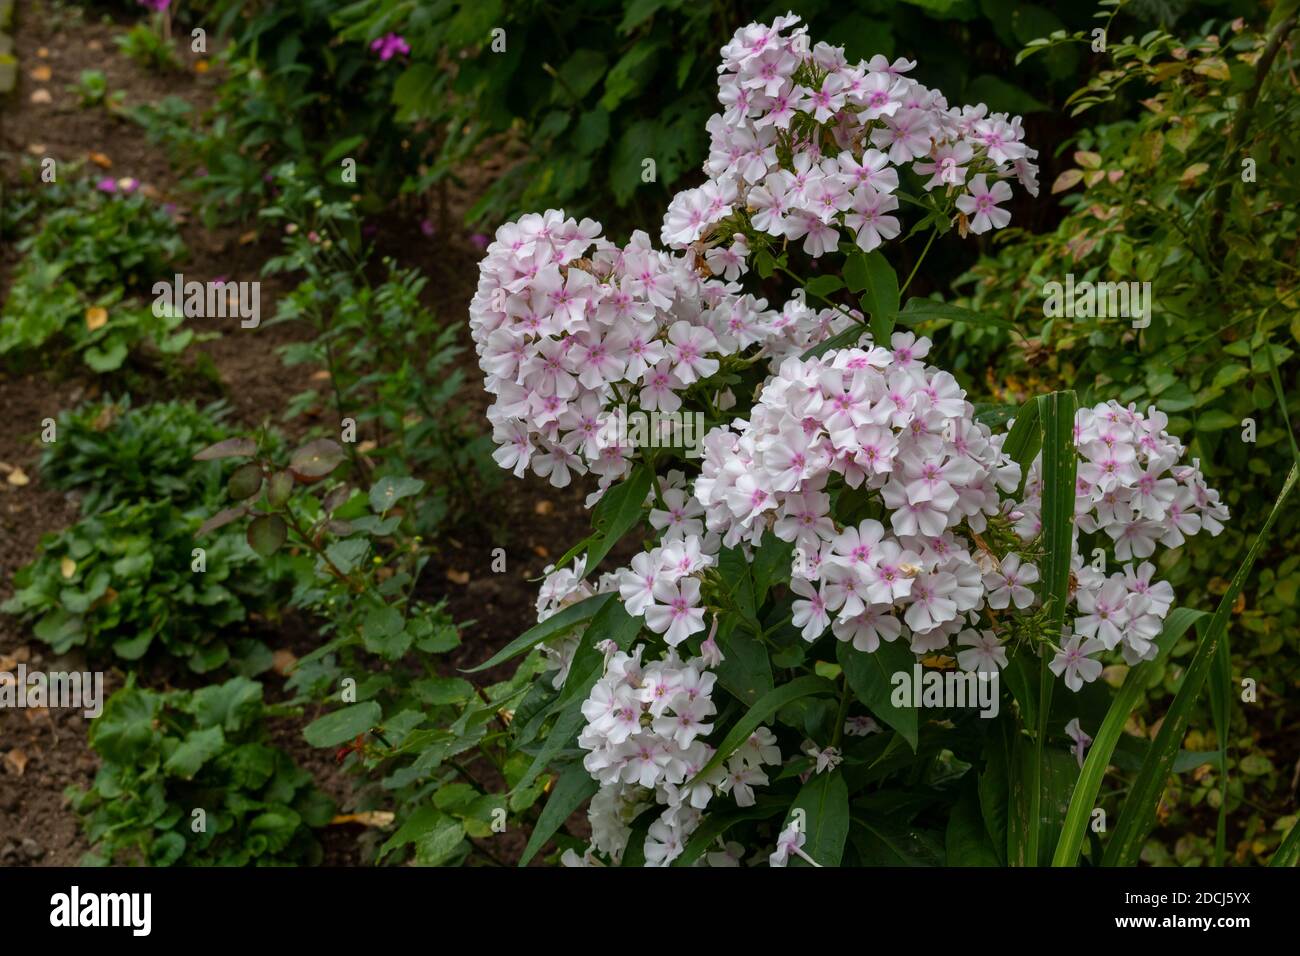 Delicate beautiful Phlox bloomed in a flower bed in the city Park Stock Photo